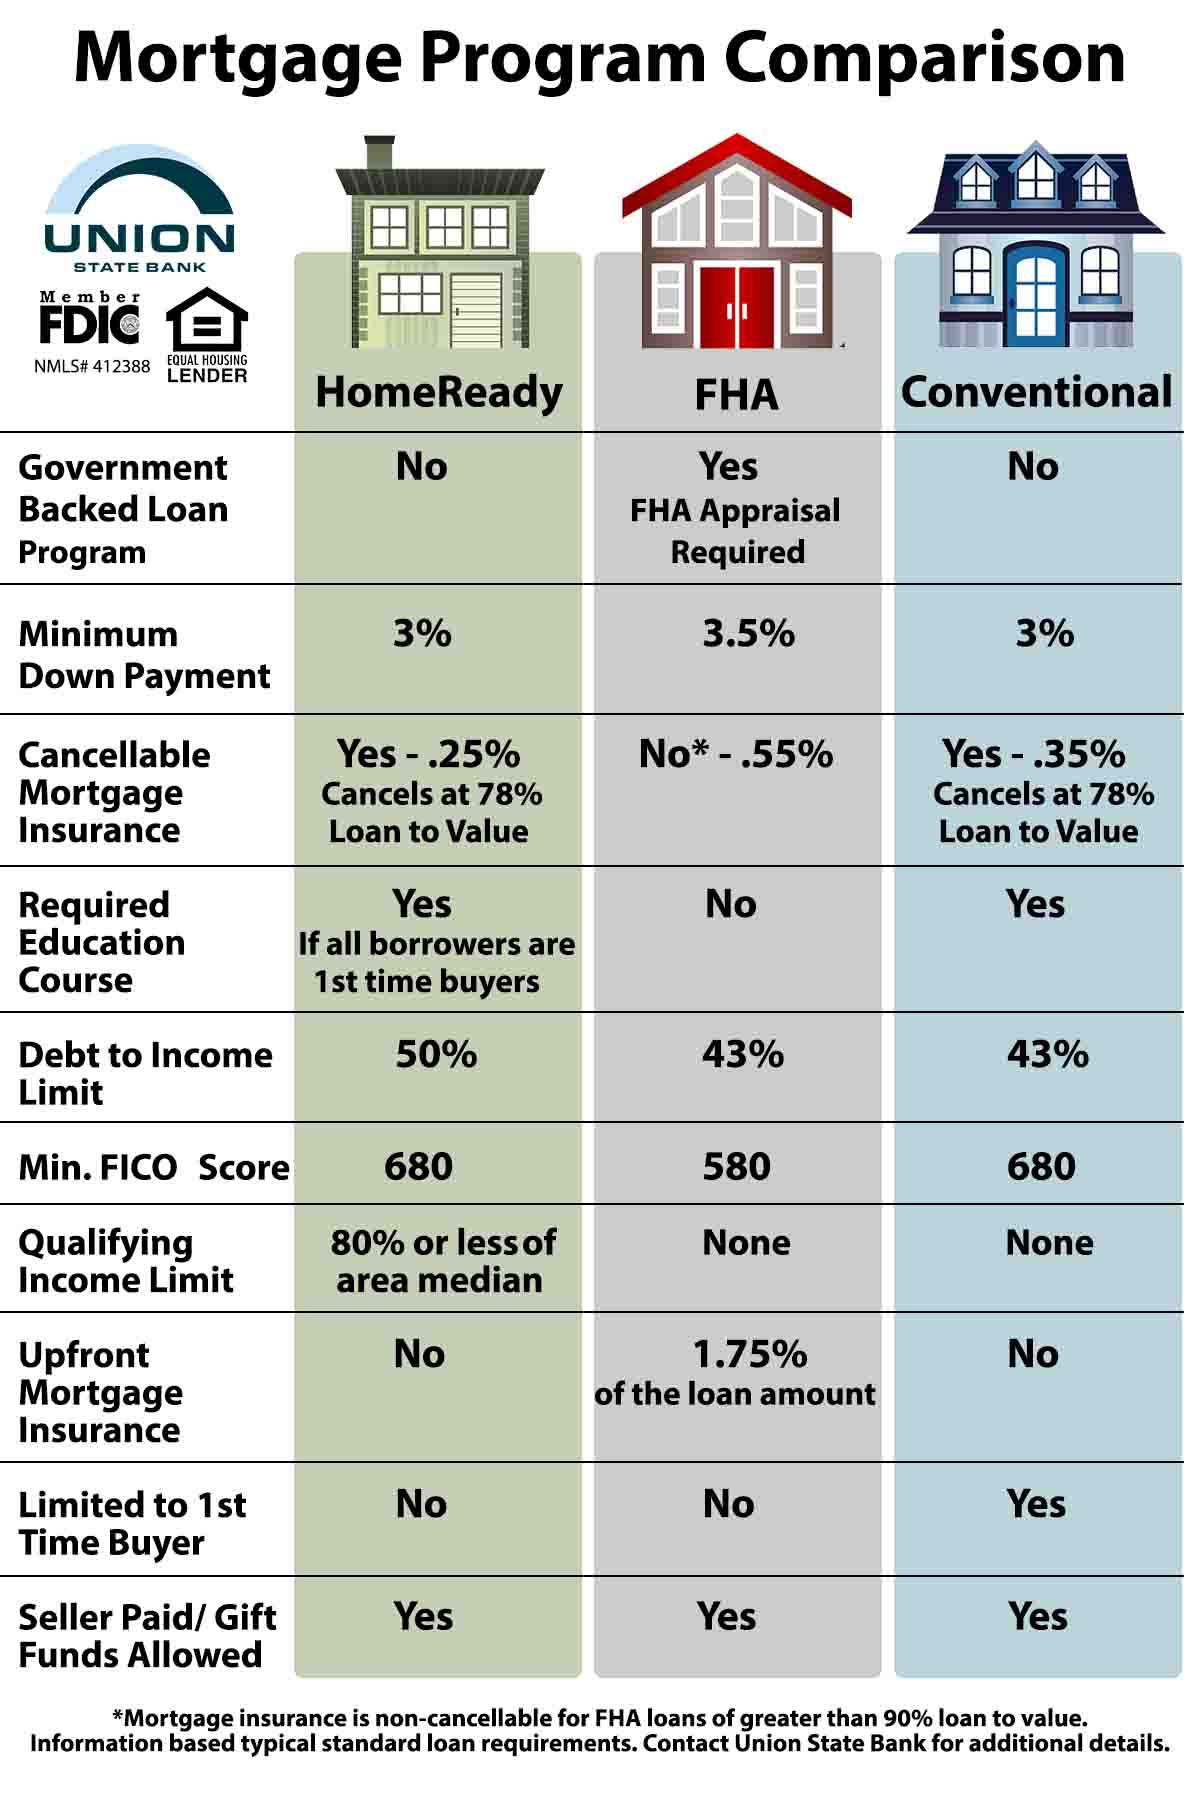 HomeReady low down payment mortgage for borrowers.